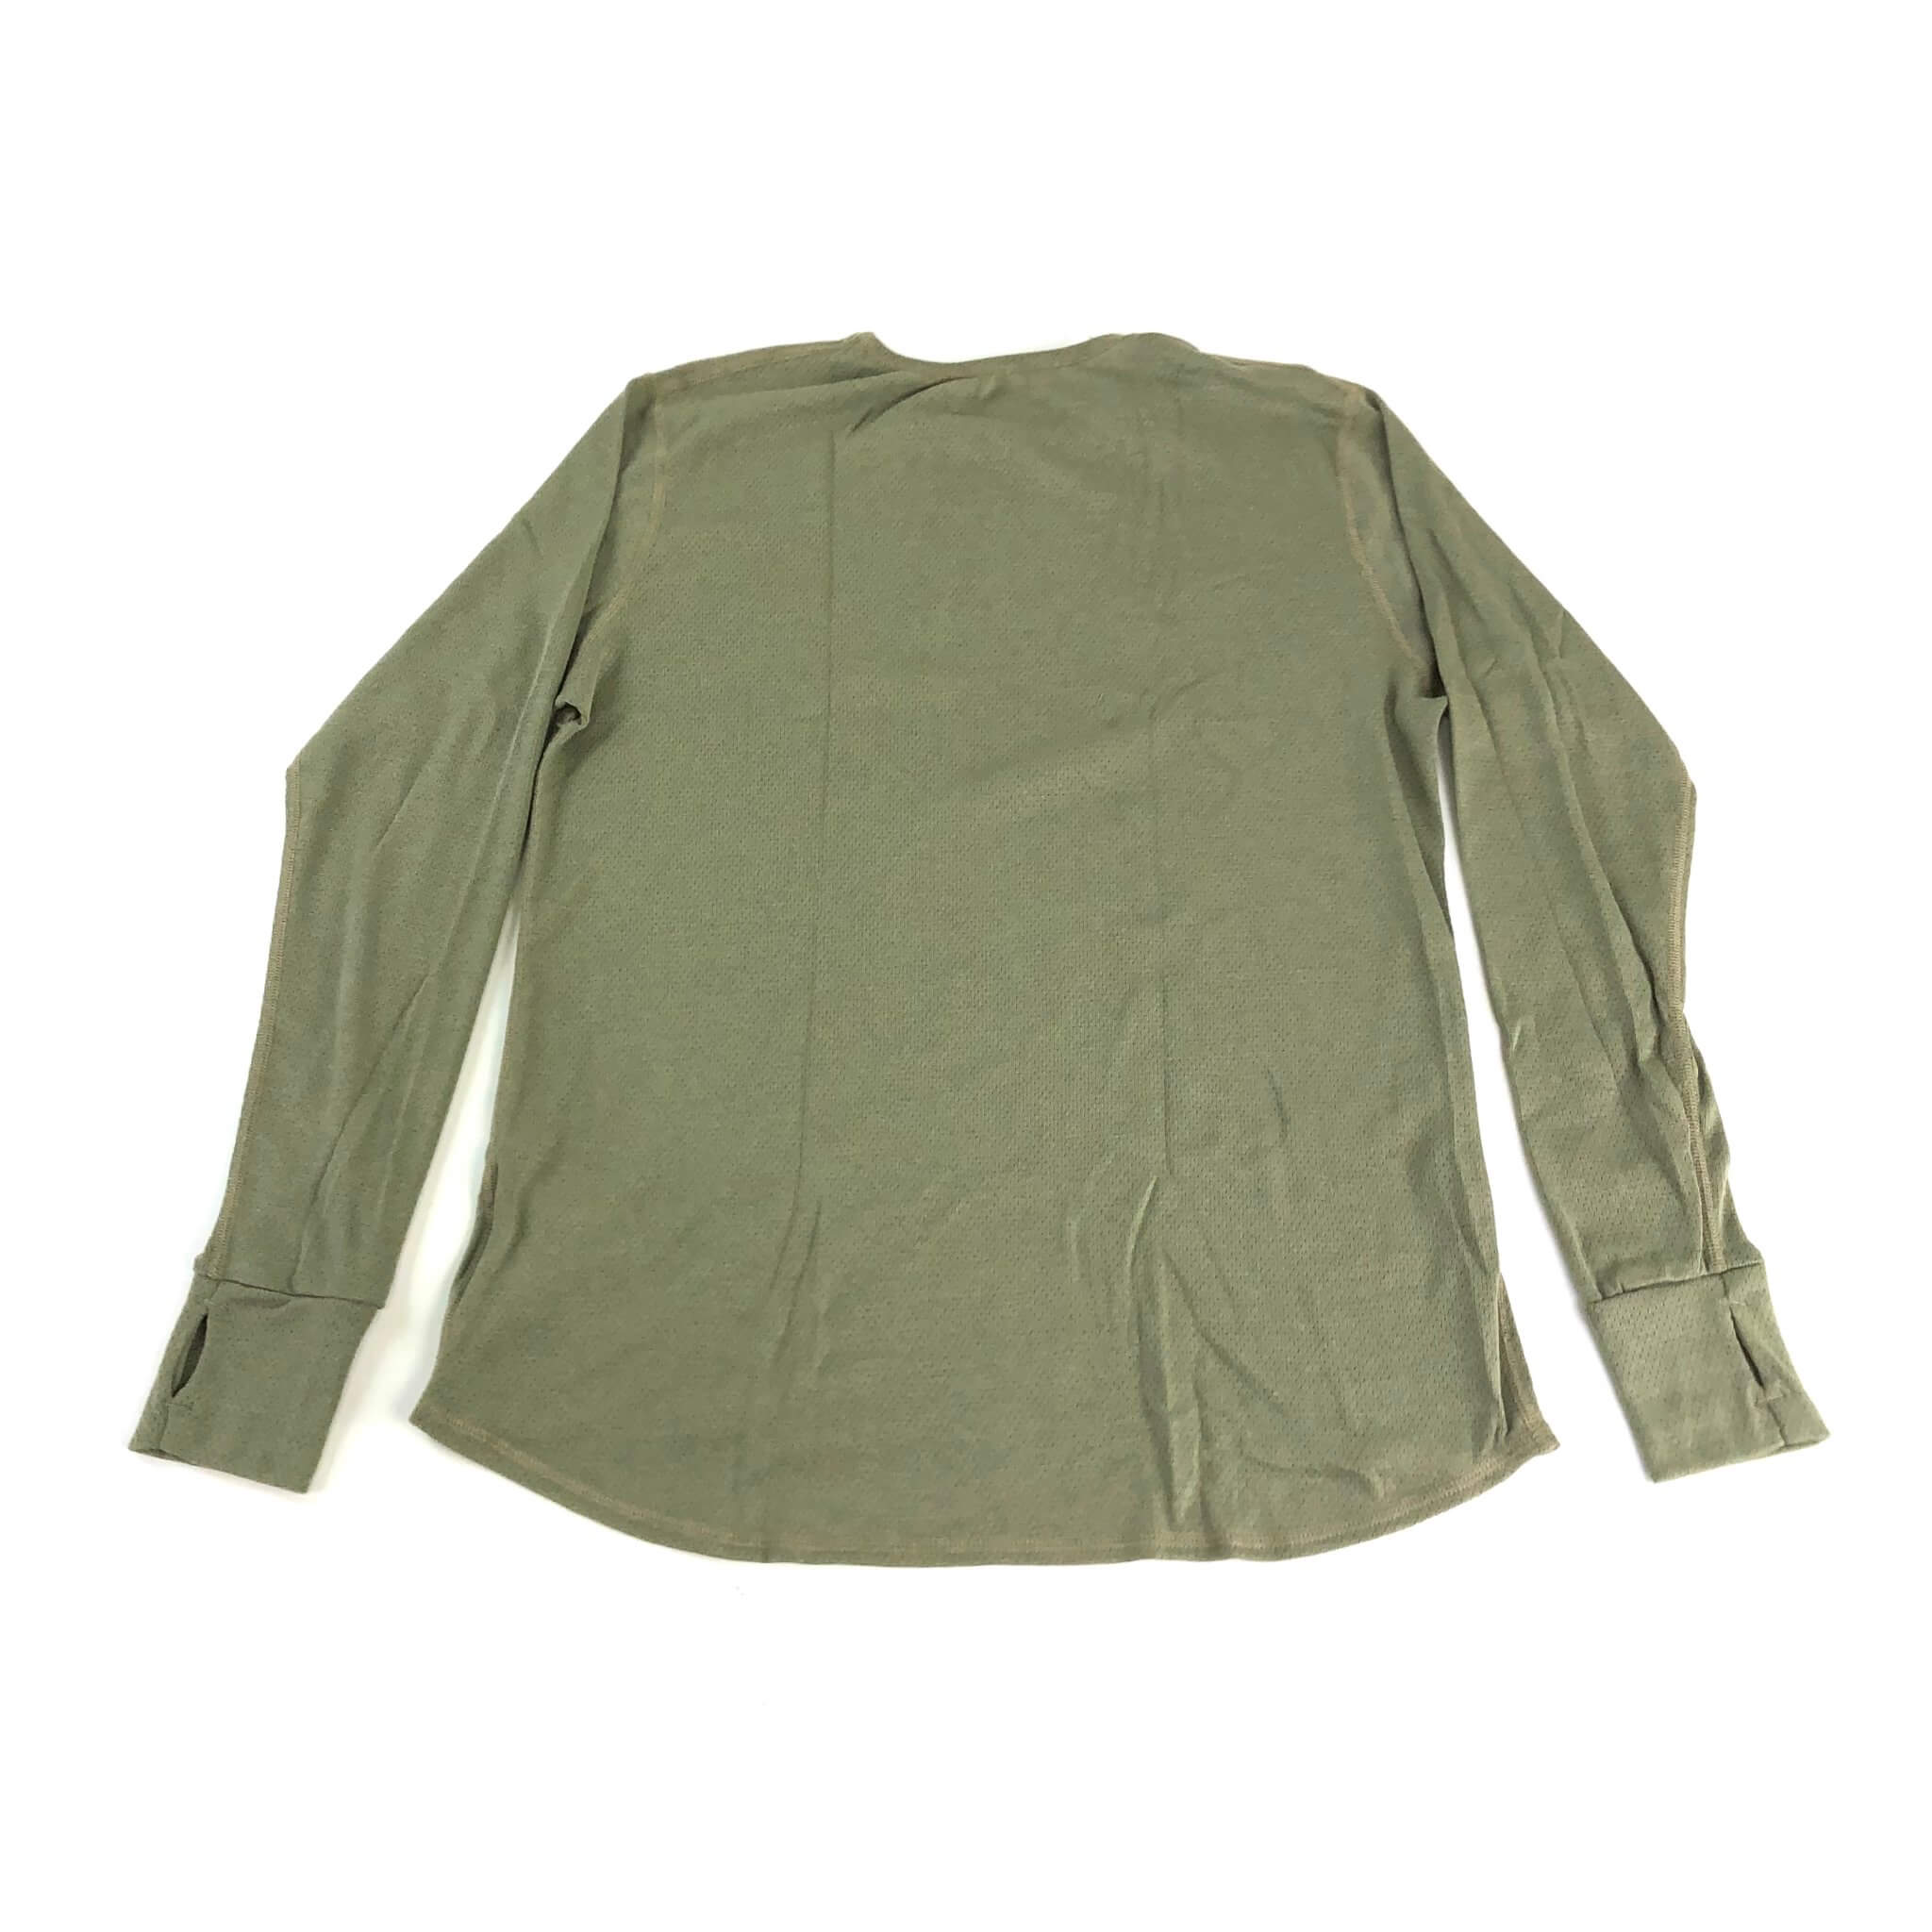 FREE Base Layer Insulated Undershirt, 499 Coyote Tan - Army Surplus